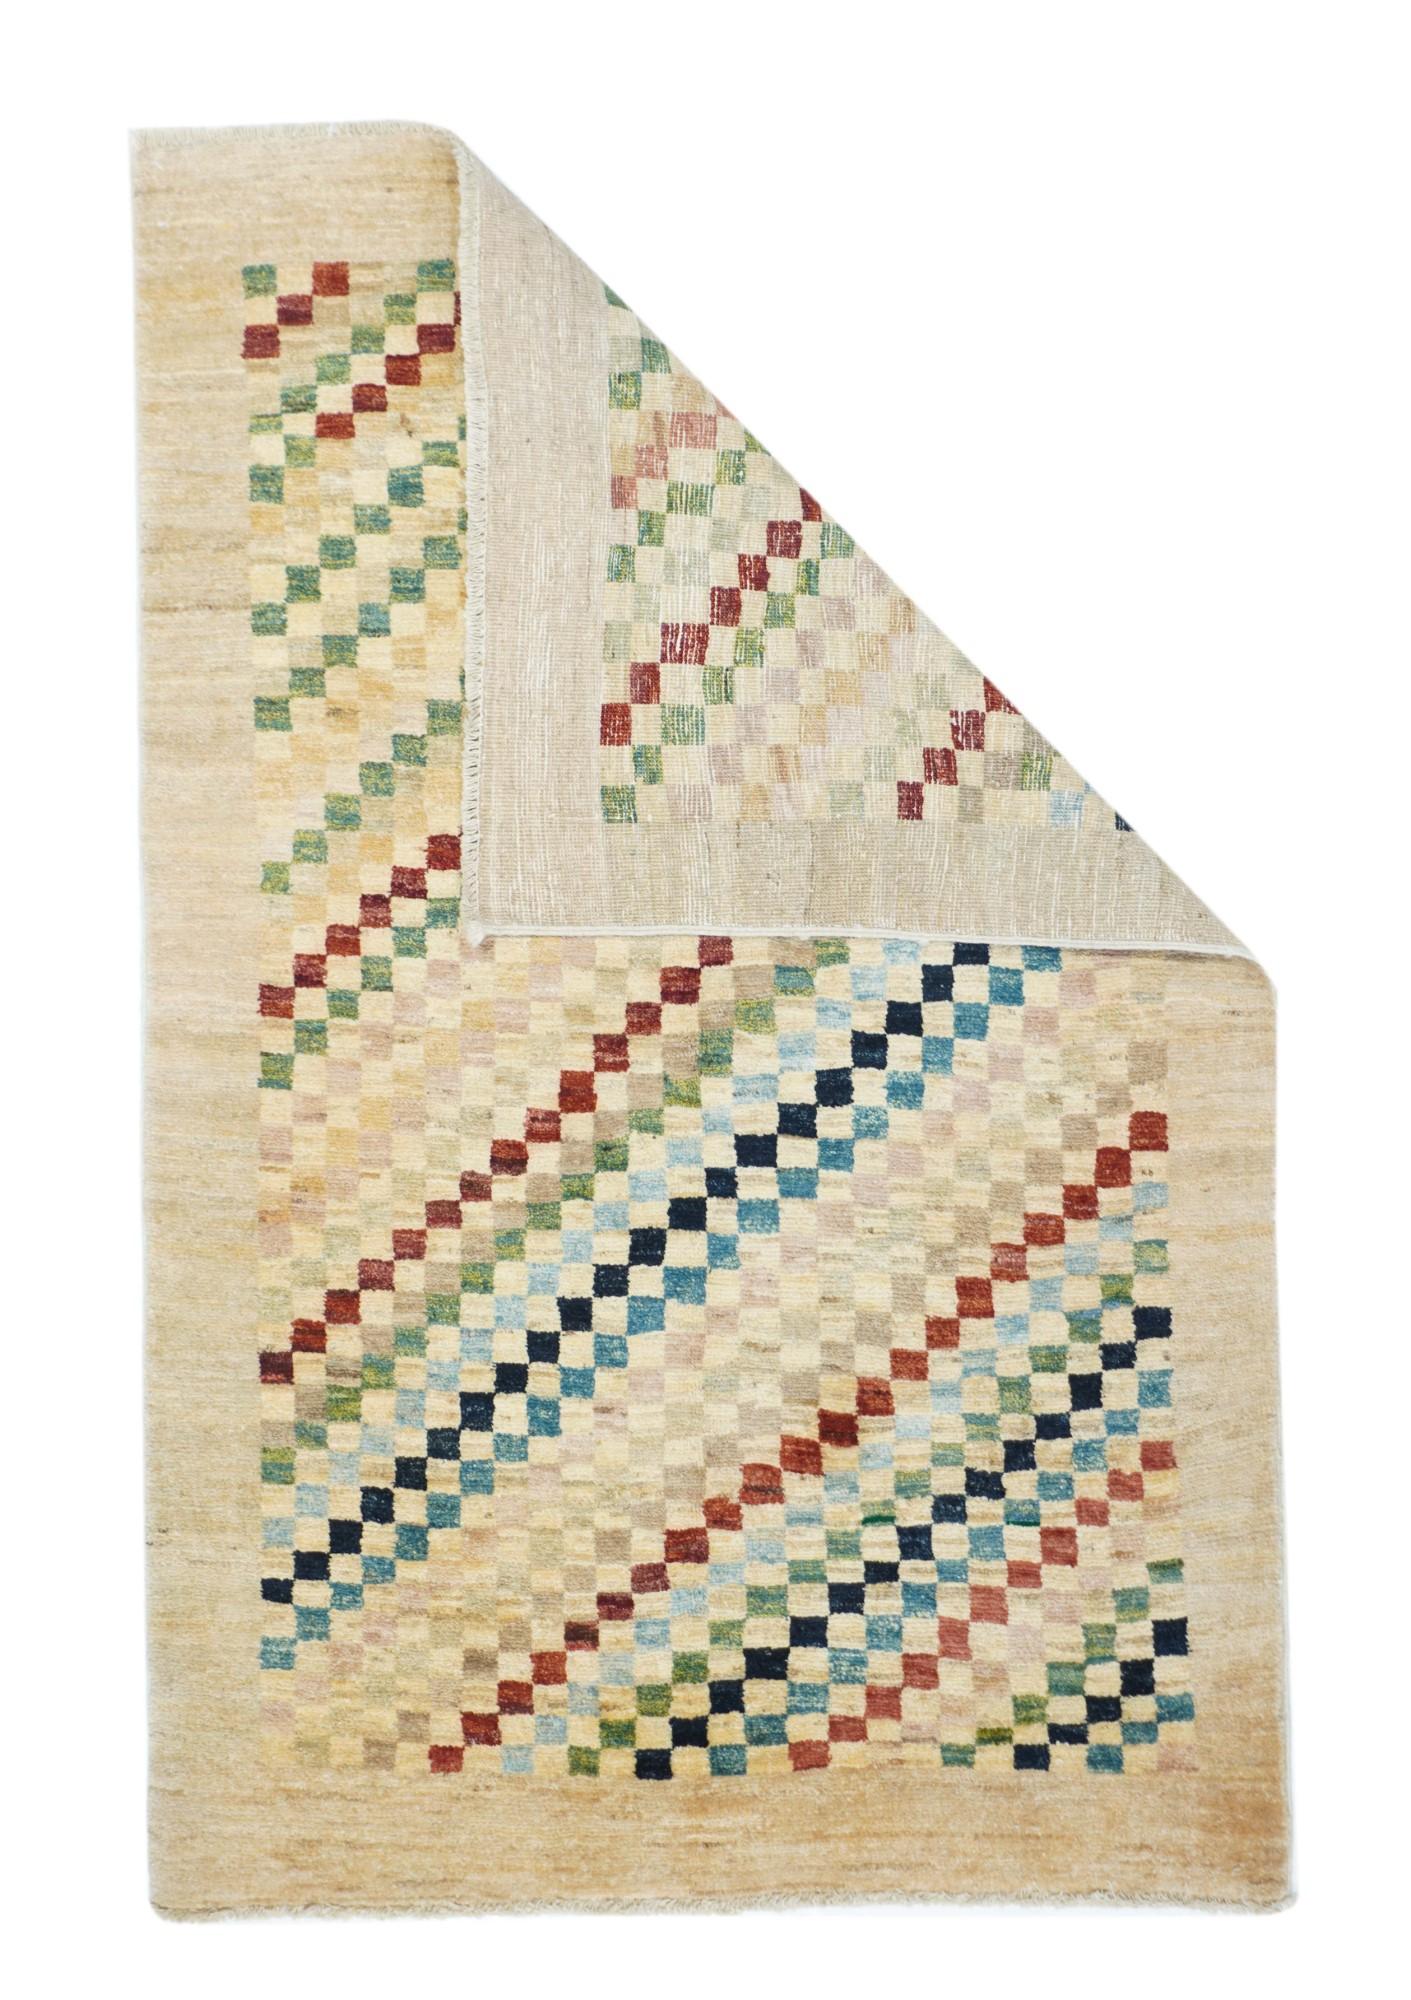 Vintage Gabbeh rug 3.1'' x 4.10''. A broad abrashed plain tan-beige border surrounds the field with its color diagonals composed of squares in shades of red, rust, black, teal, pale blue, straw and khaki. Abrashed squares and no brash, saturated